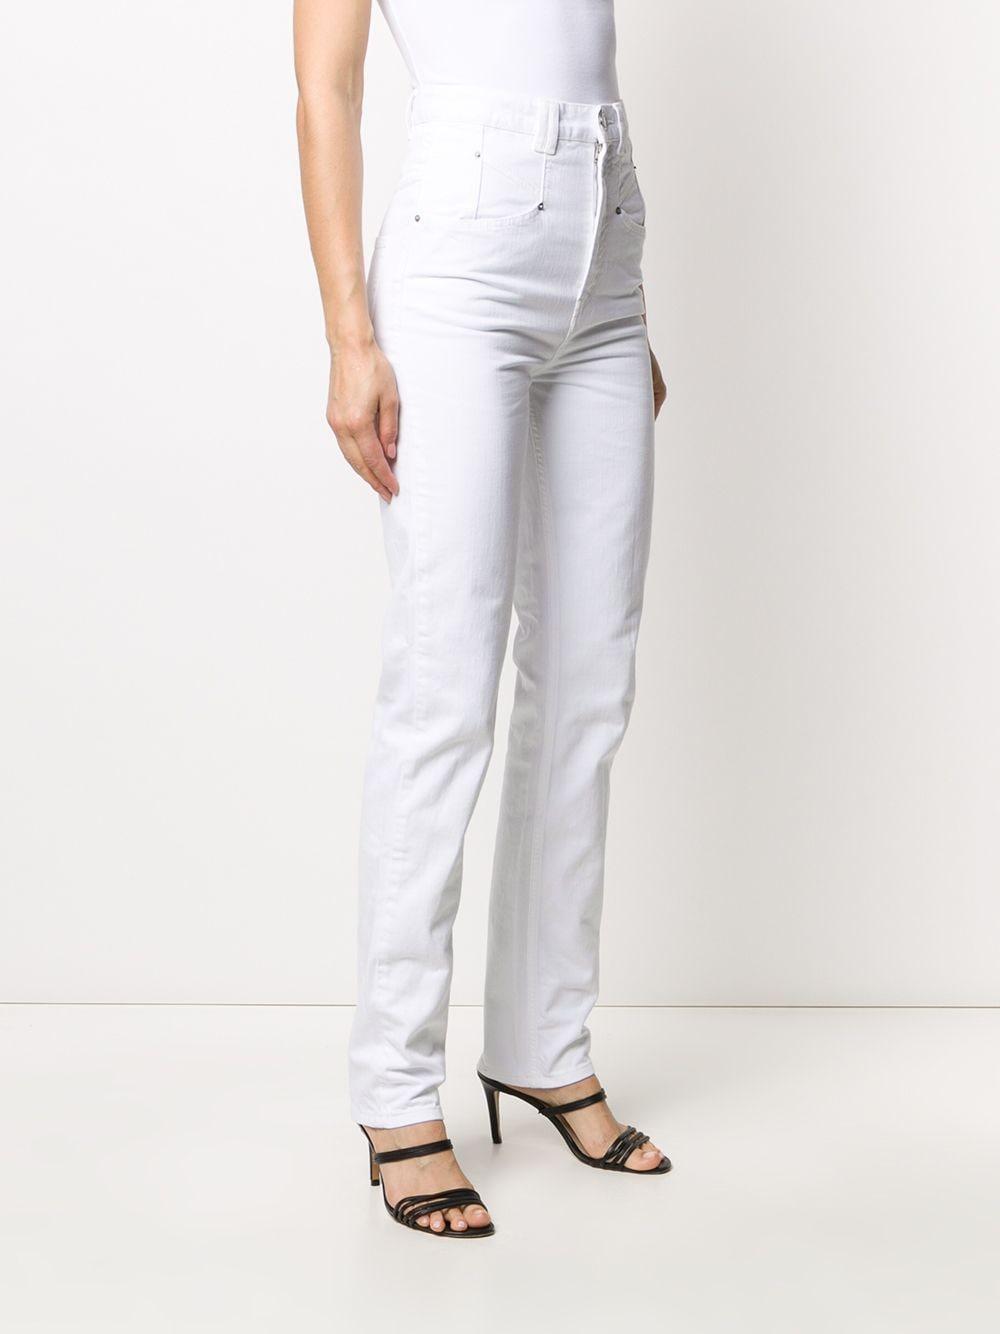 Isabel Marant Denim Super High-rise Tapered Jeans in White - Lyst